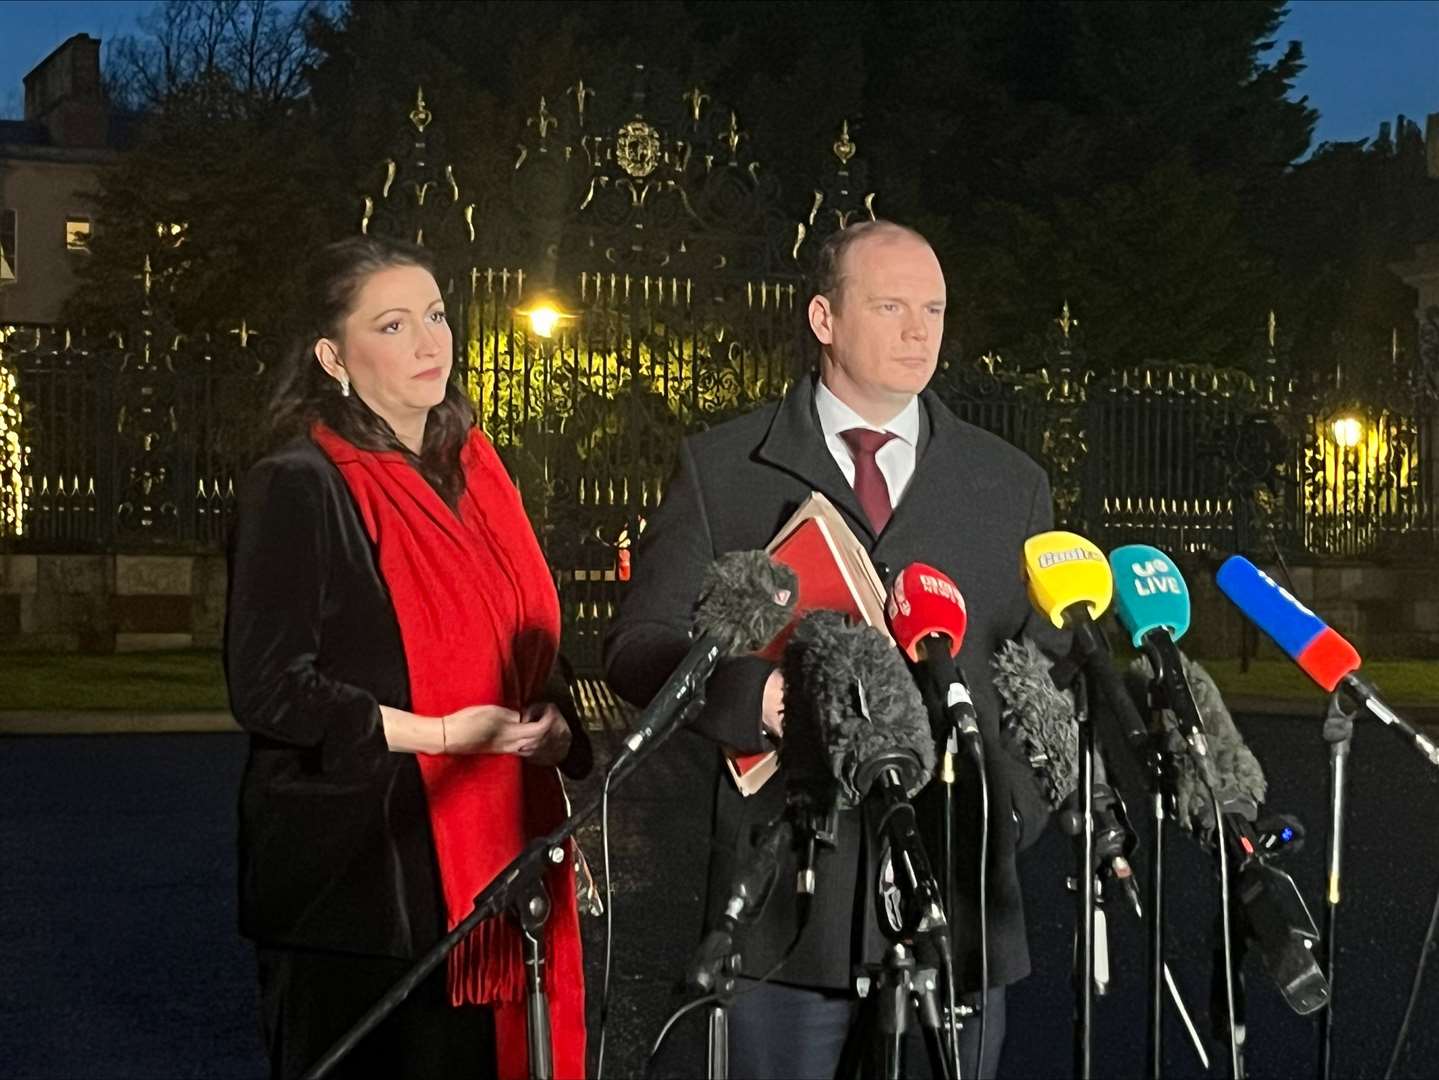 DUP MLA Gordon Lyons with party colleague Emma Little-Pengelly speaking to the media outside Hillsborough Castle (Claudia Savage/PA)